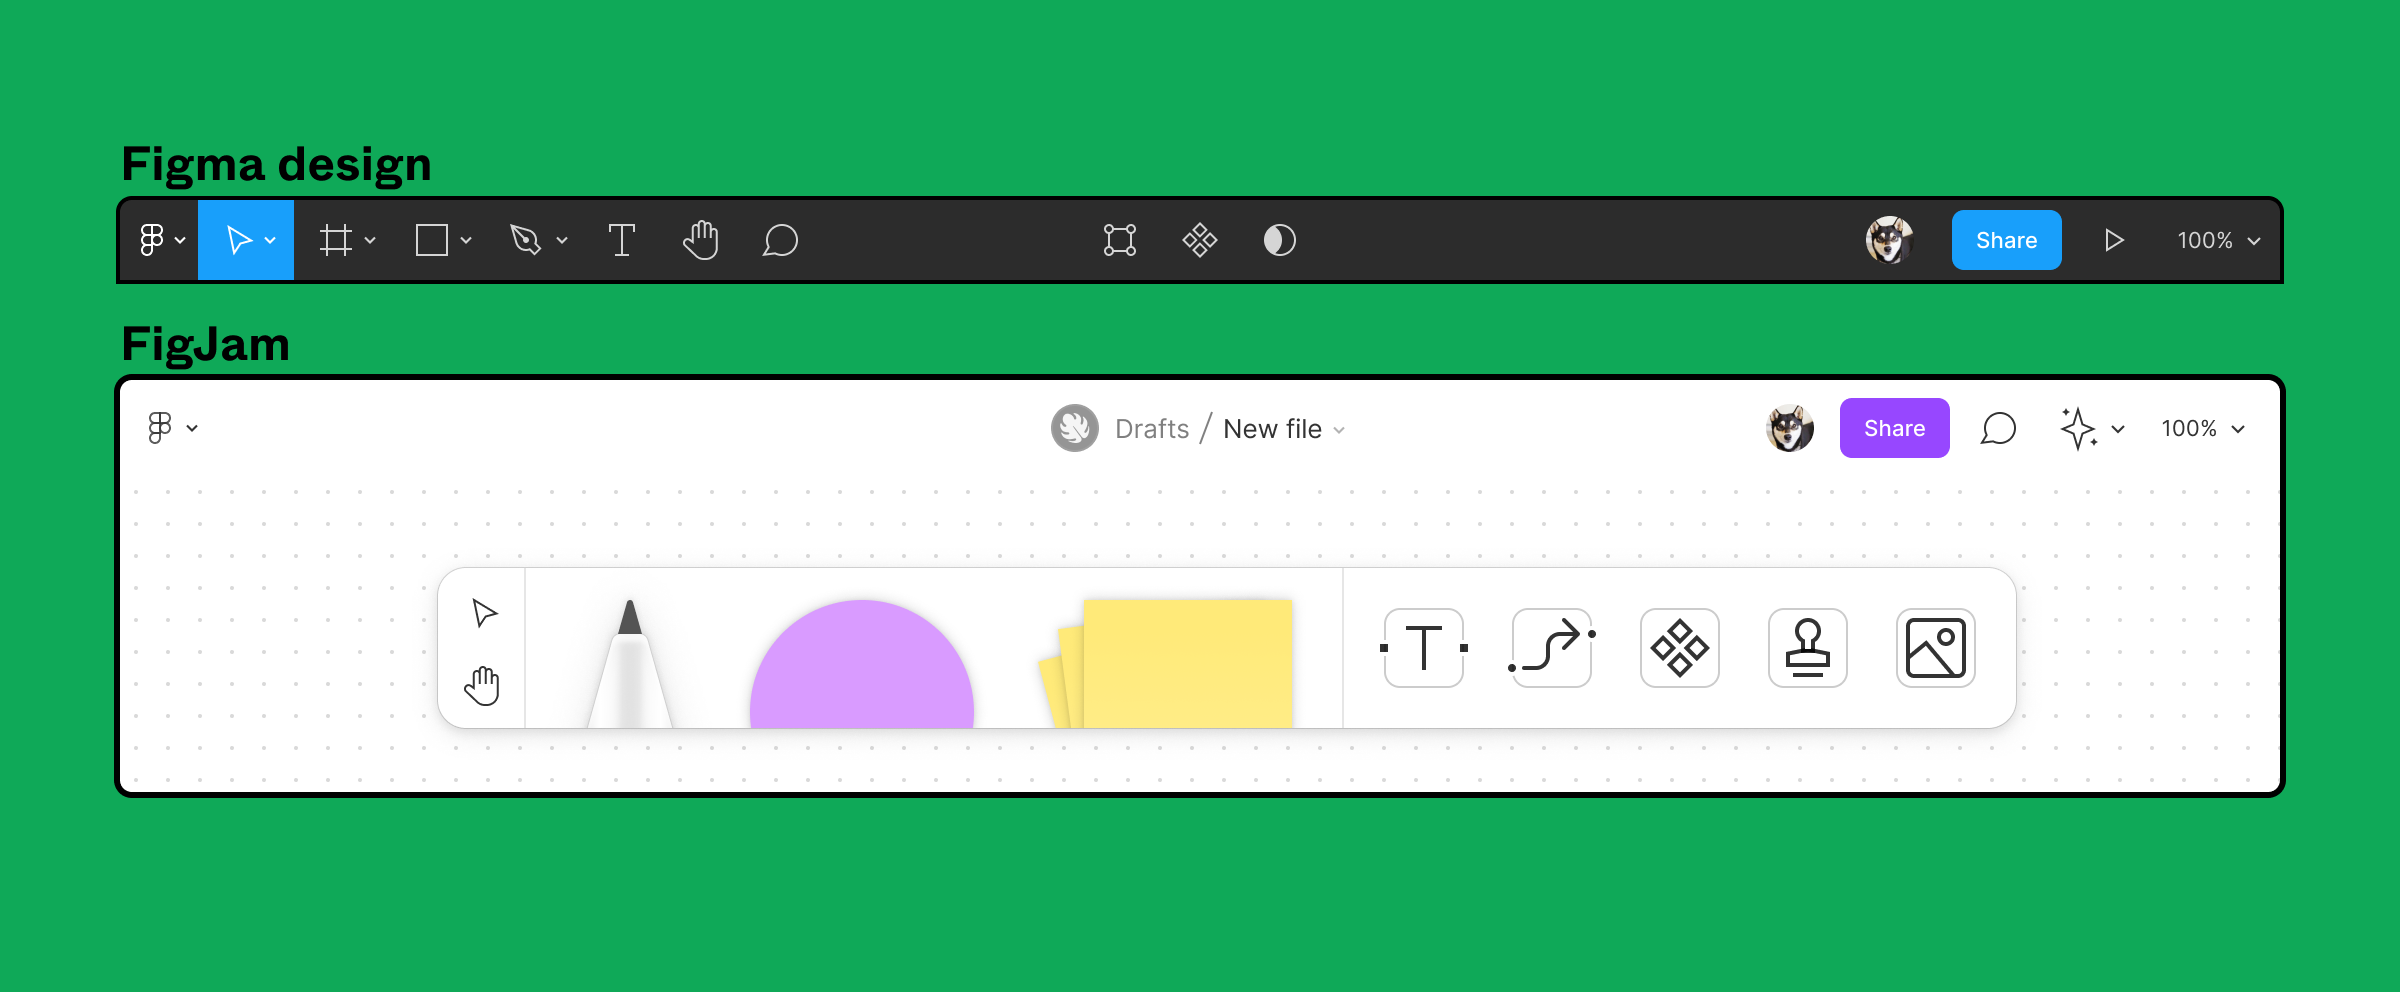 Toolbars in Figma design and FigJam which allow users to create and edit layers in the file